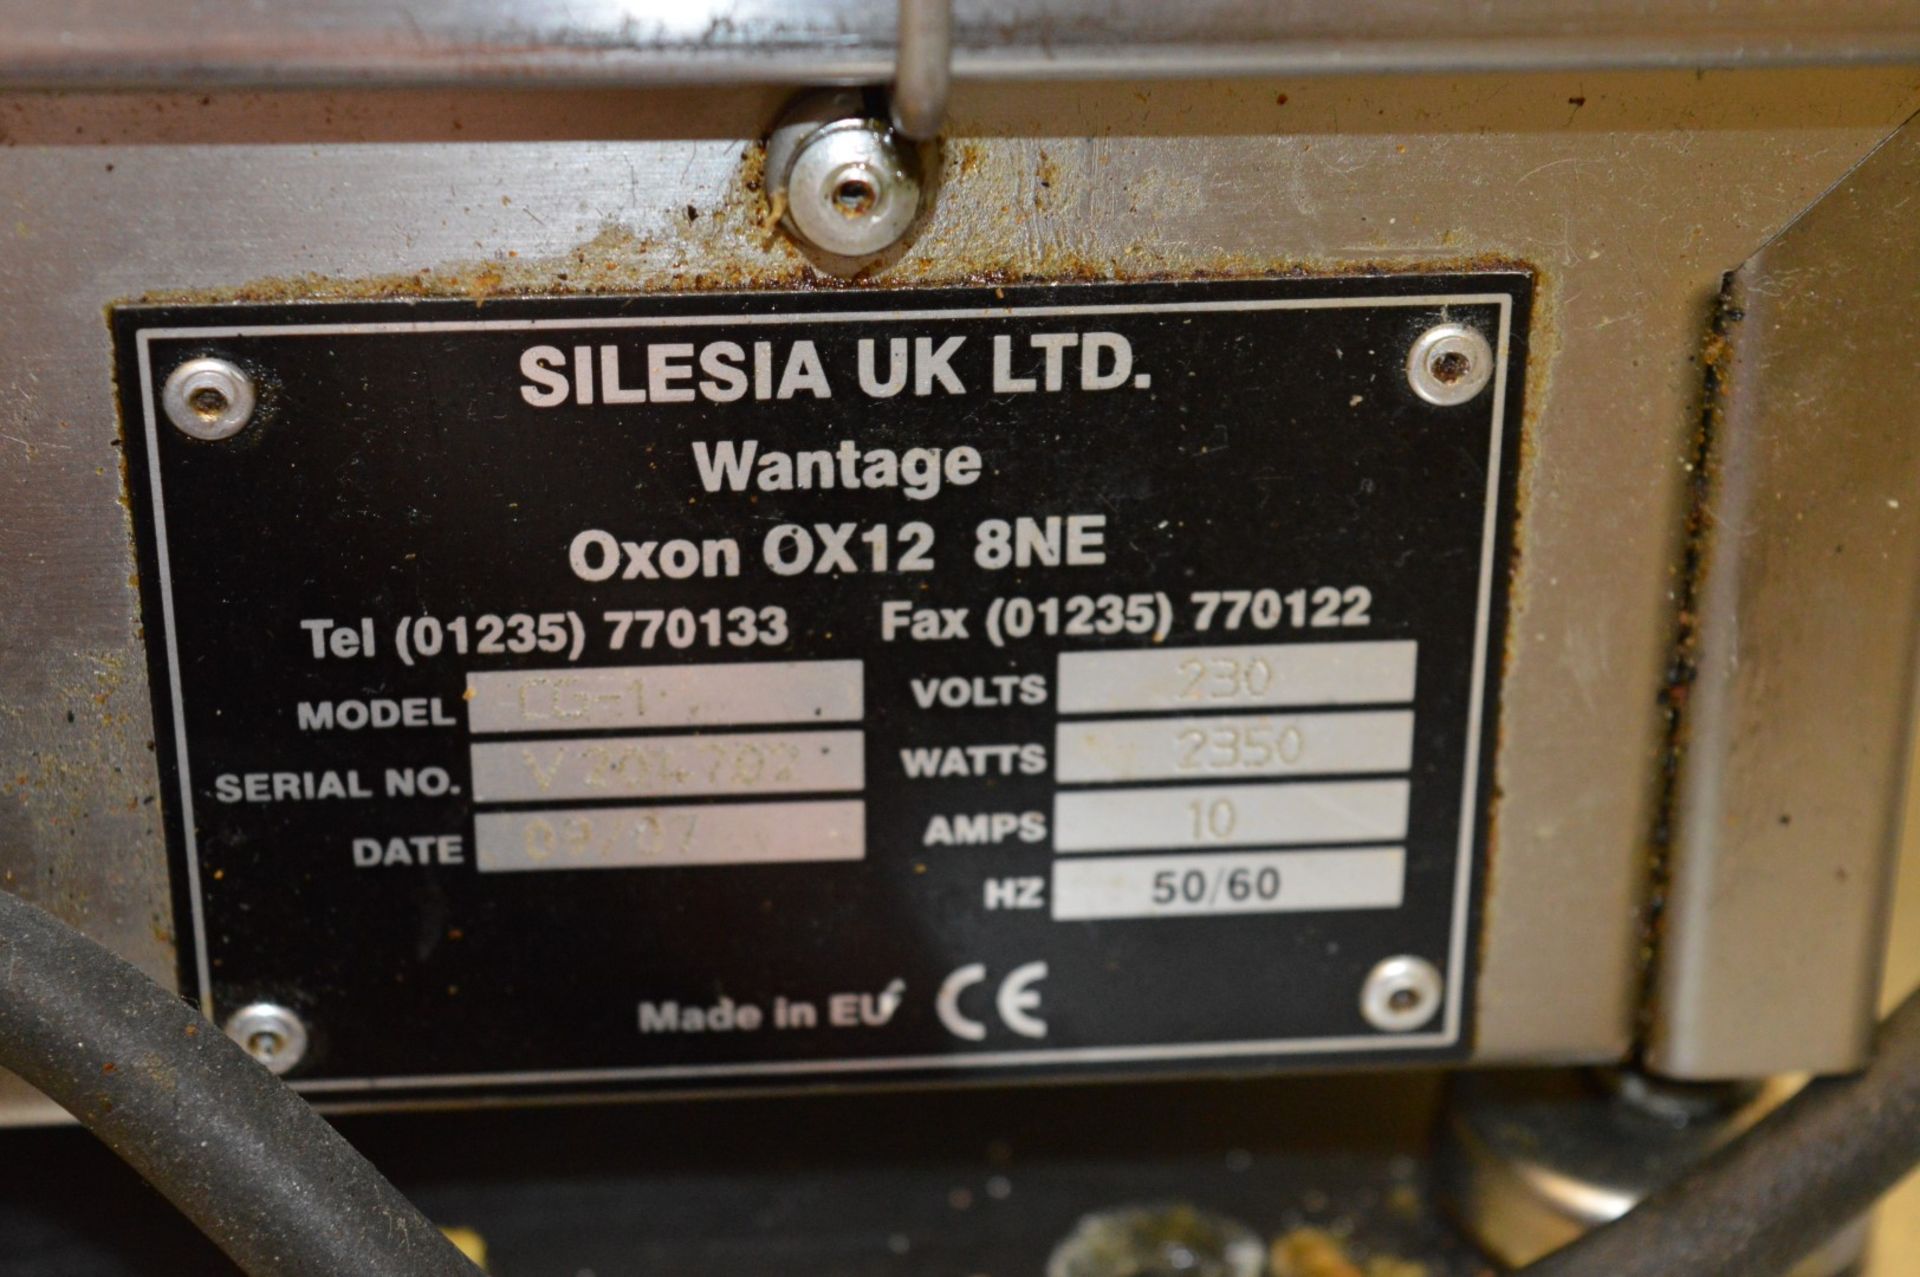 1 x Silesia Velox CG1 Single High Speed Contact Grill - Takes Just 6 Minutes to Reach Cooking - Image 3 of 4